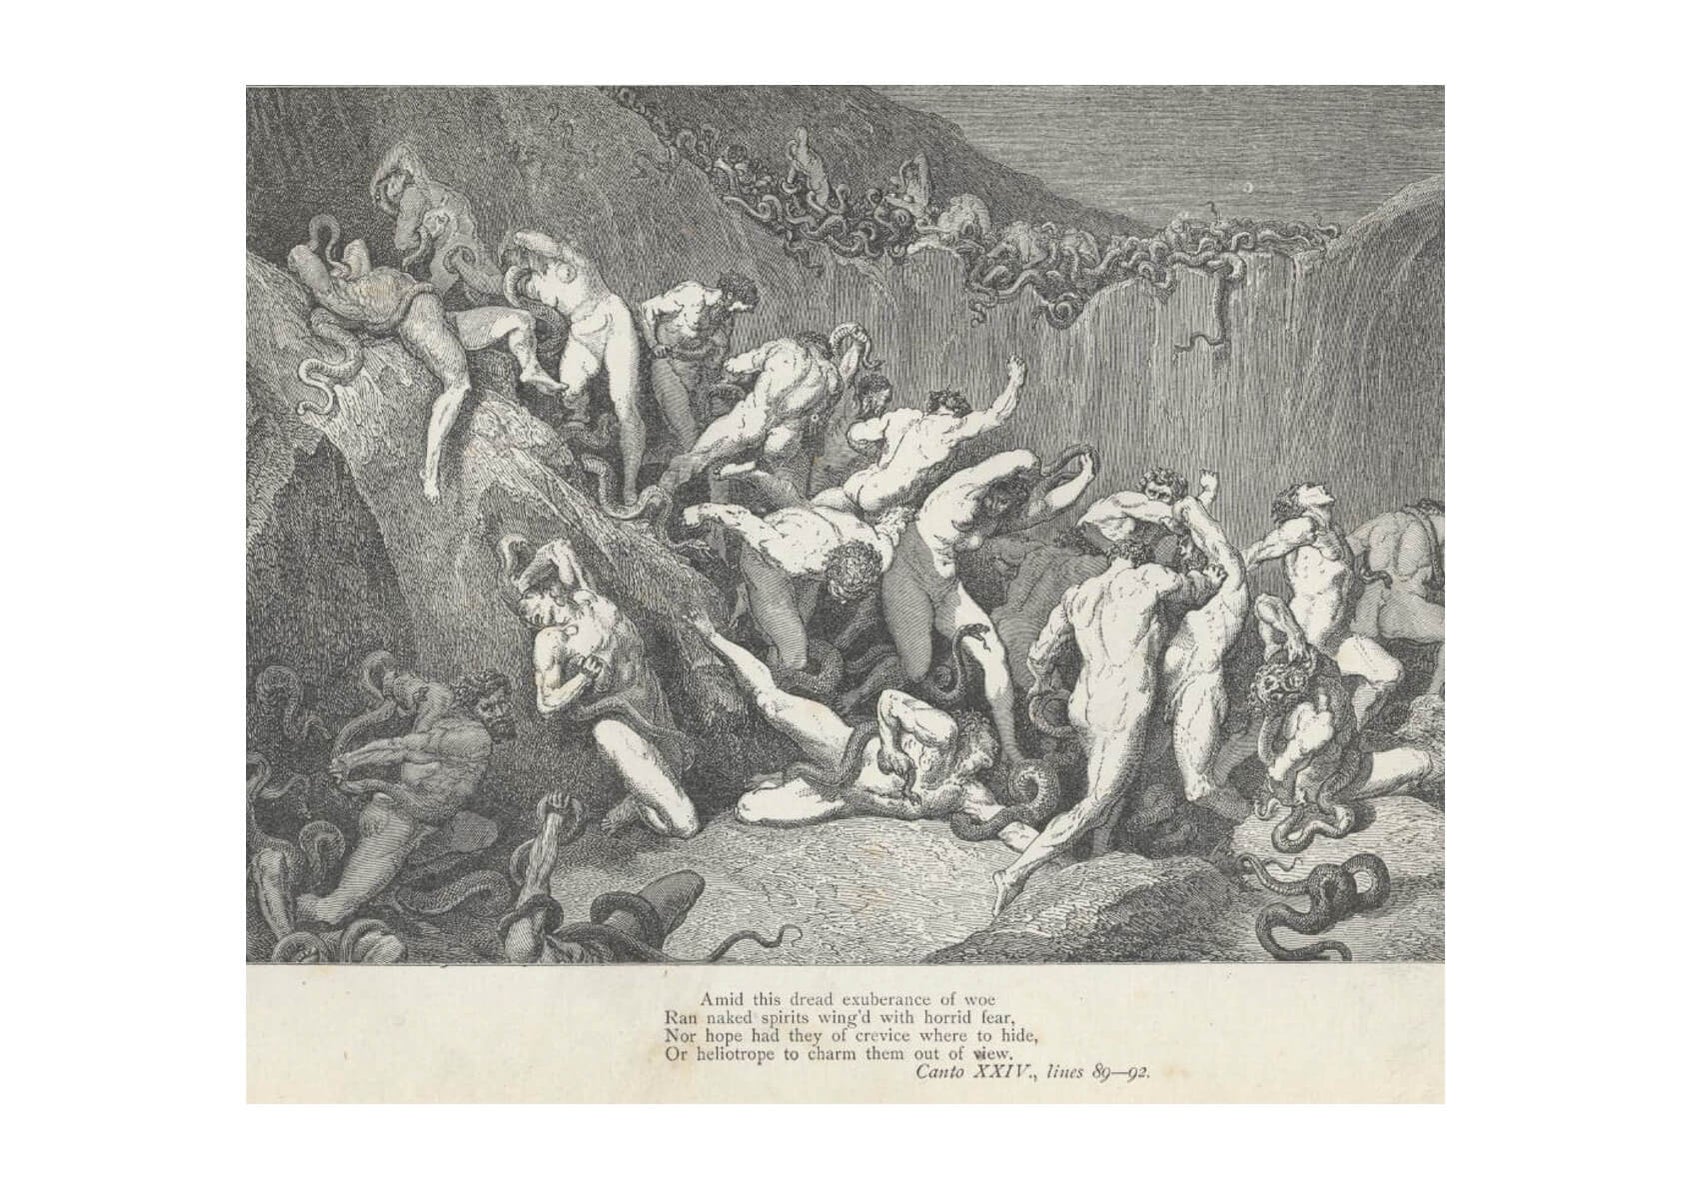 Gustave Doré - Dante's Inferno - Canto 24 Verses 89-92 — Spiffing Prints